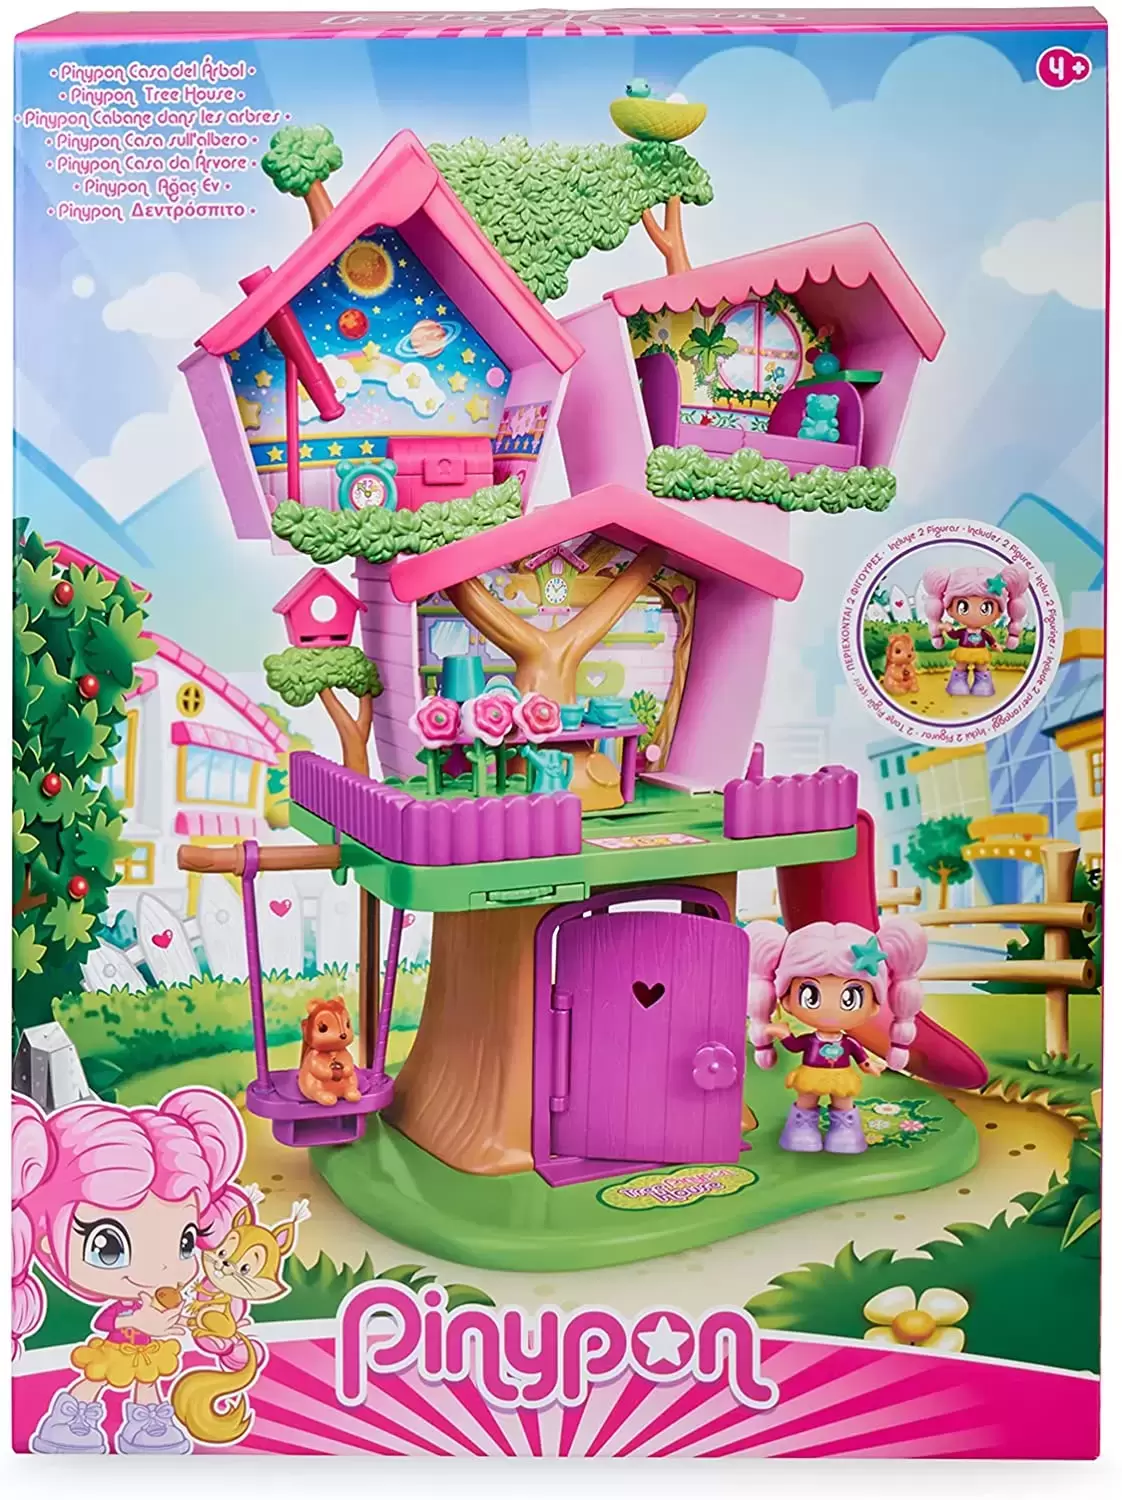 TRee House - Pinypon action figure